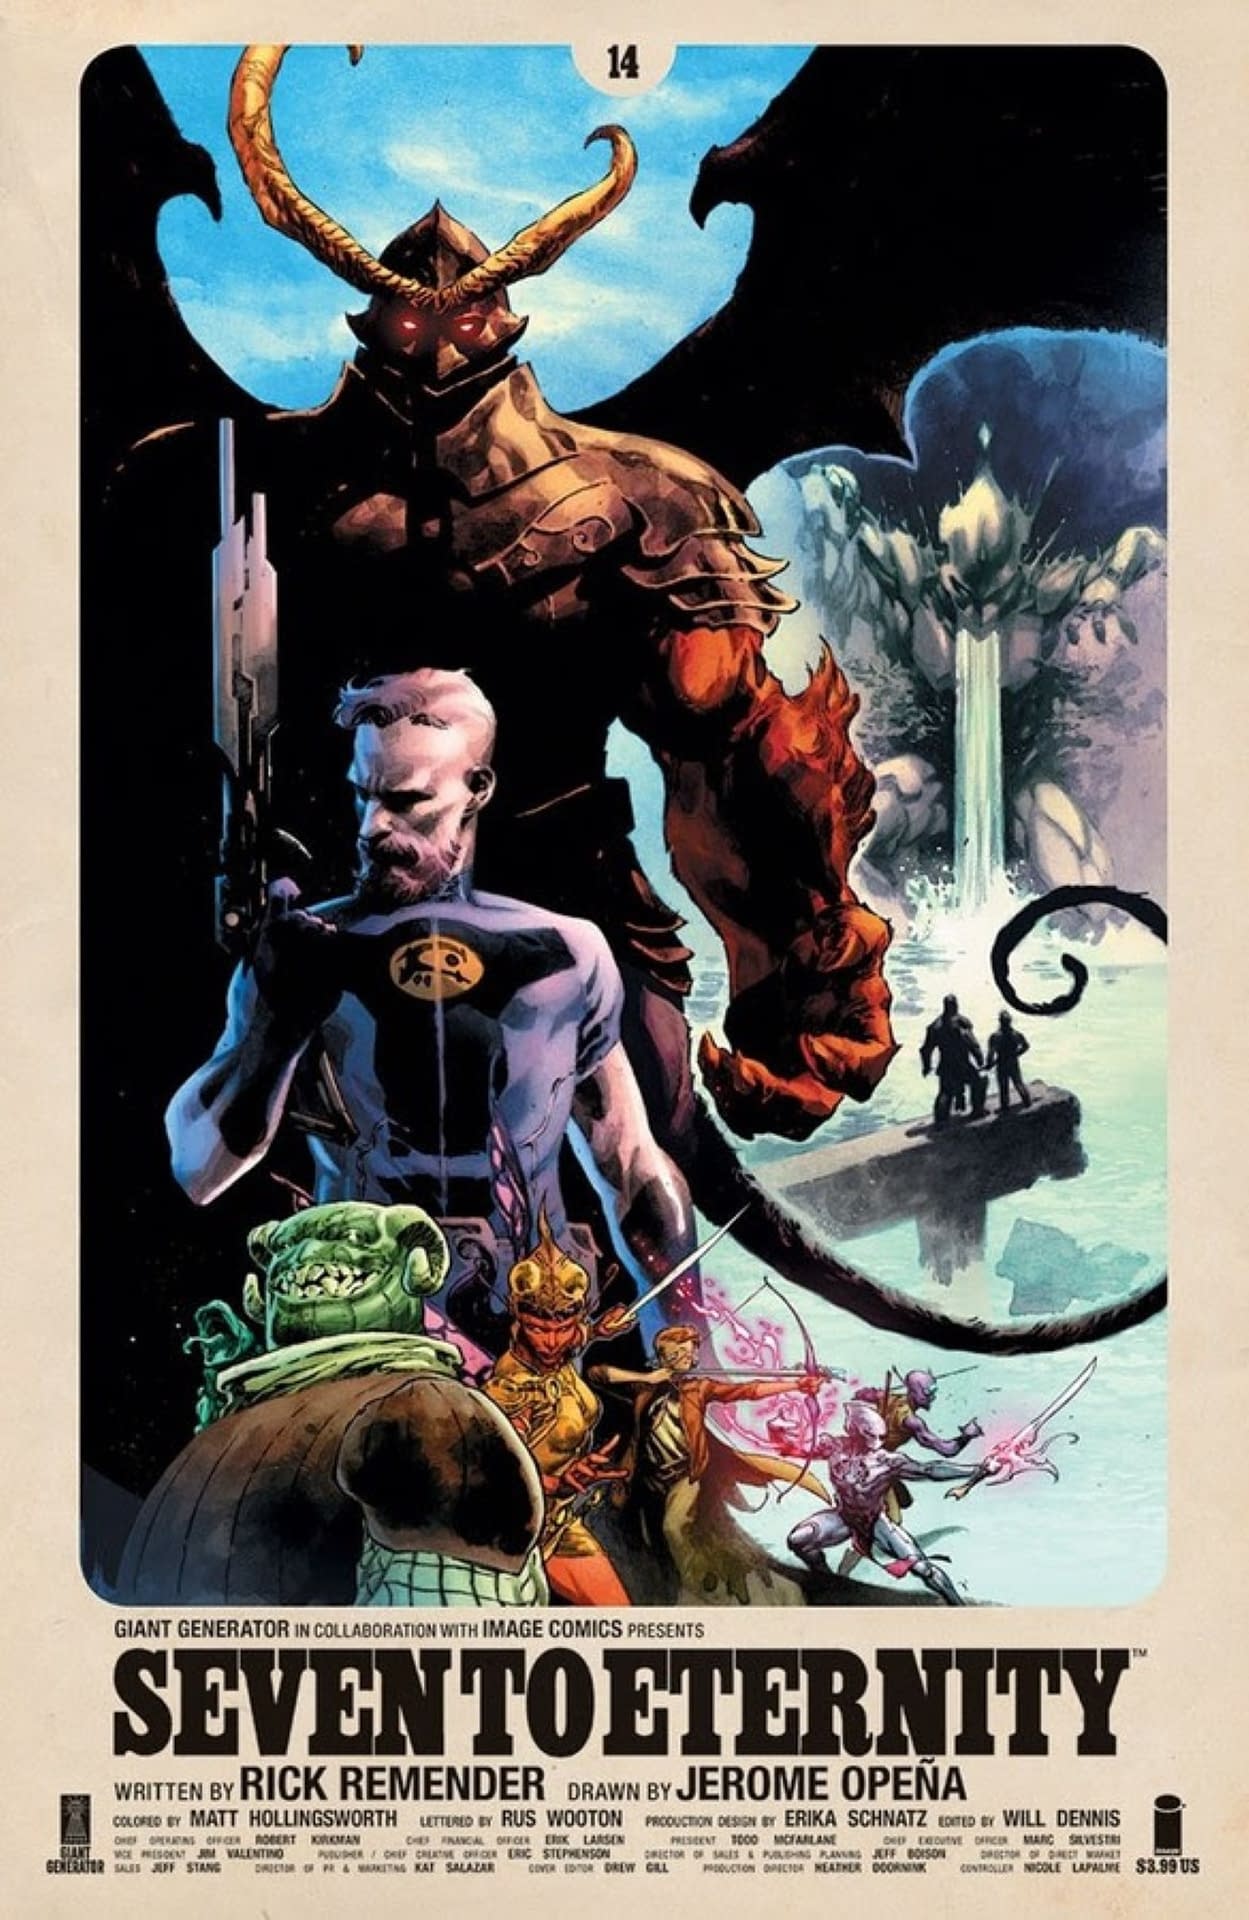 Seven to Eternity by Rick Remender